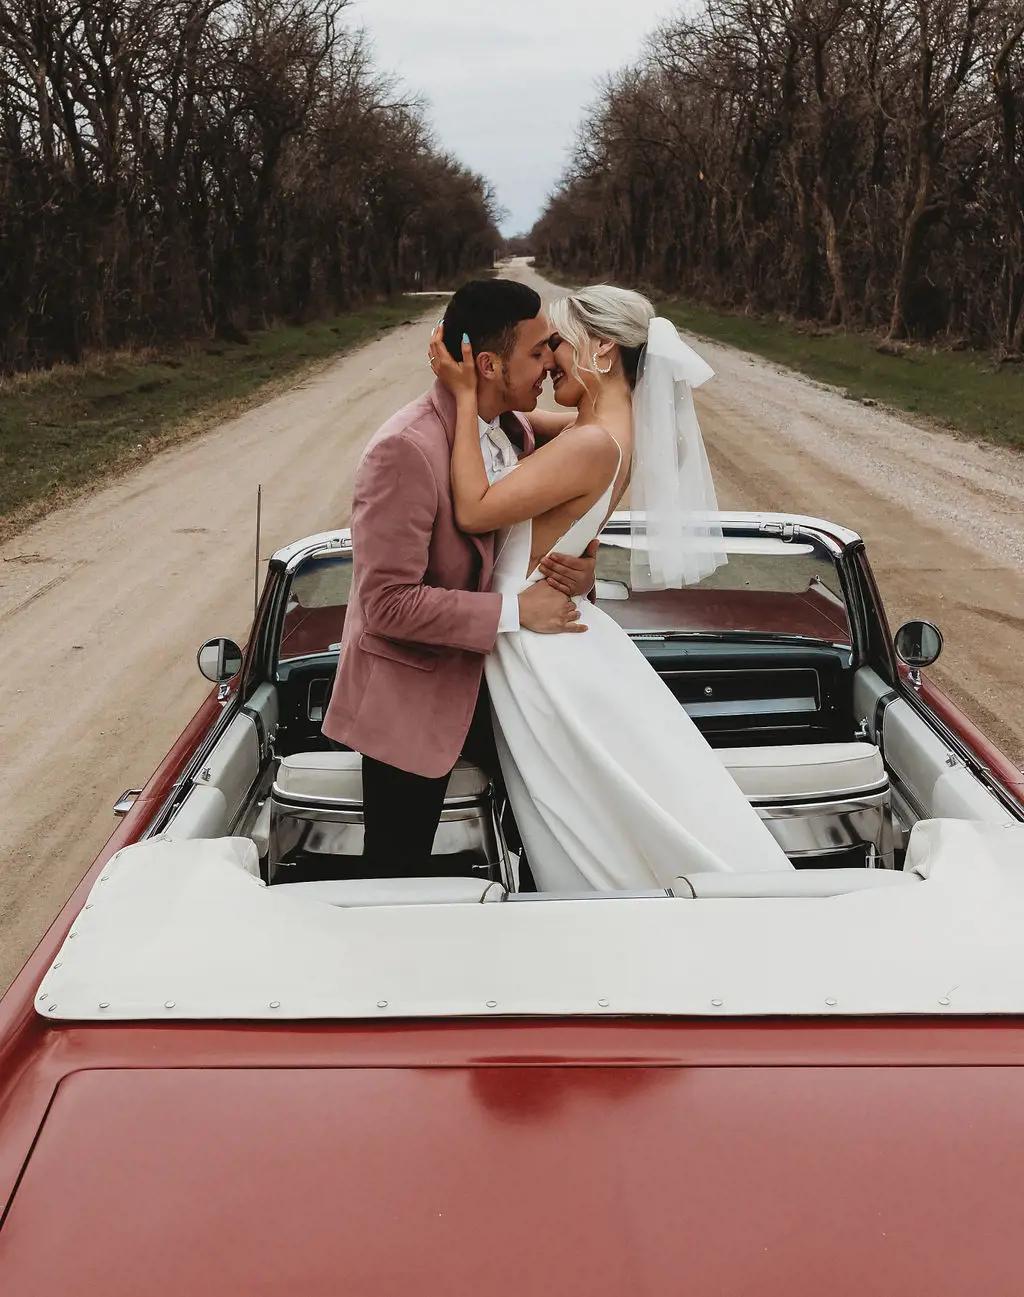 Roadtrip Elopement Styled Shoot ft. Bridal Bows + A Sexy Slit! Image